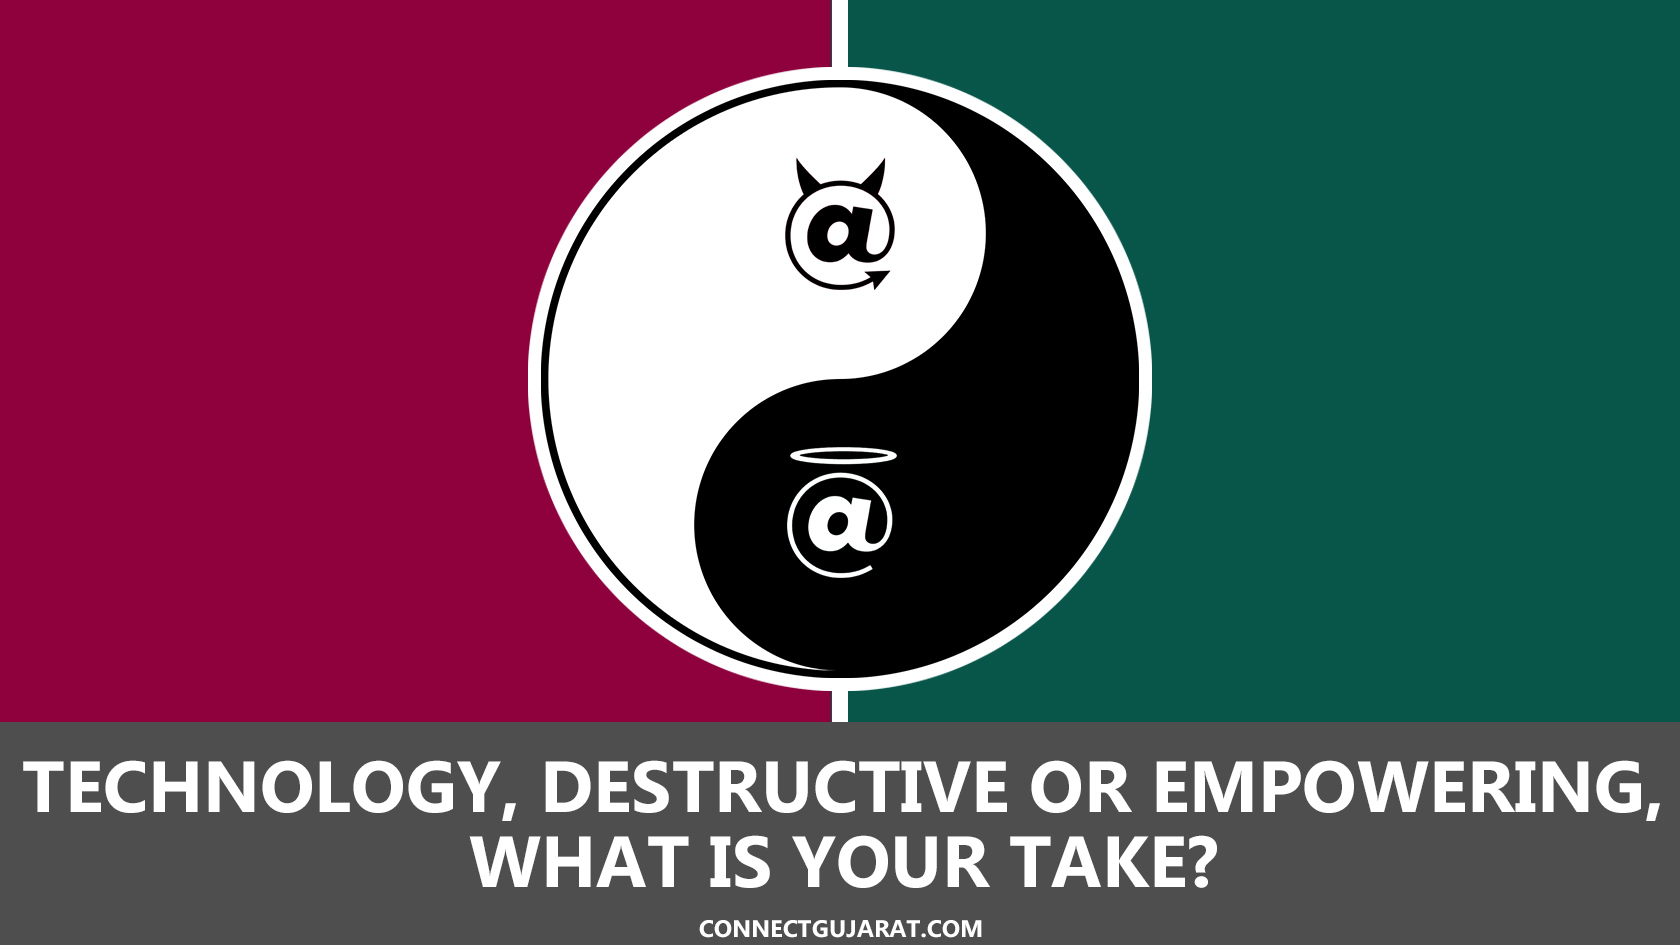 Technology, destructive or empowering, what is your take?